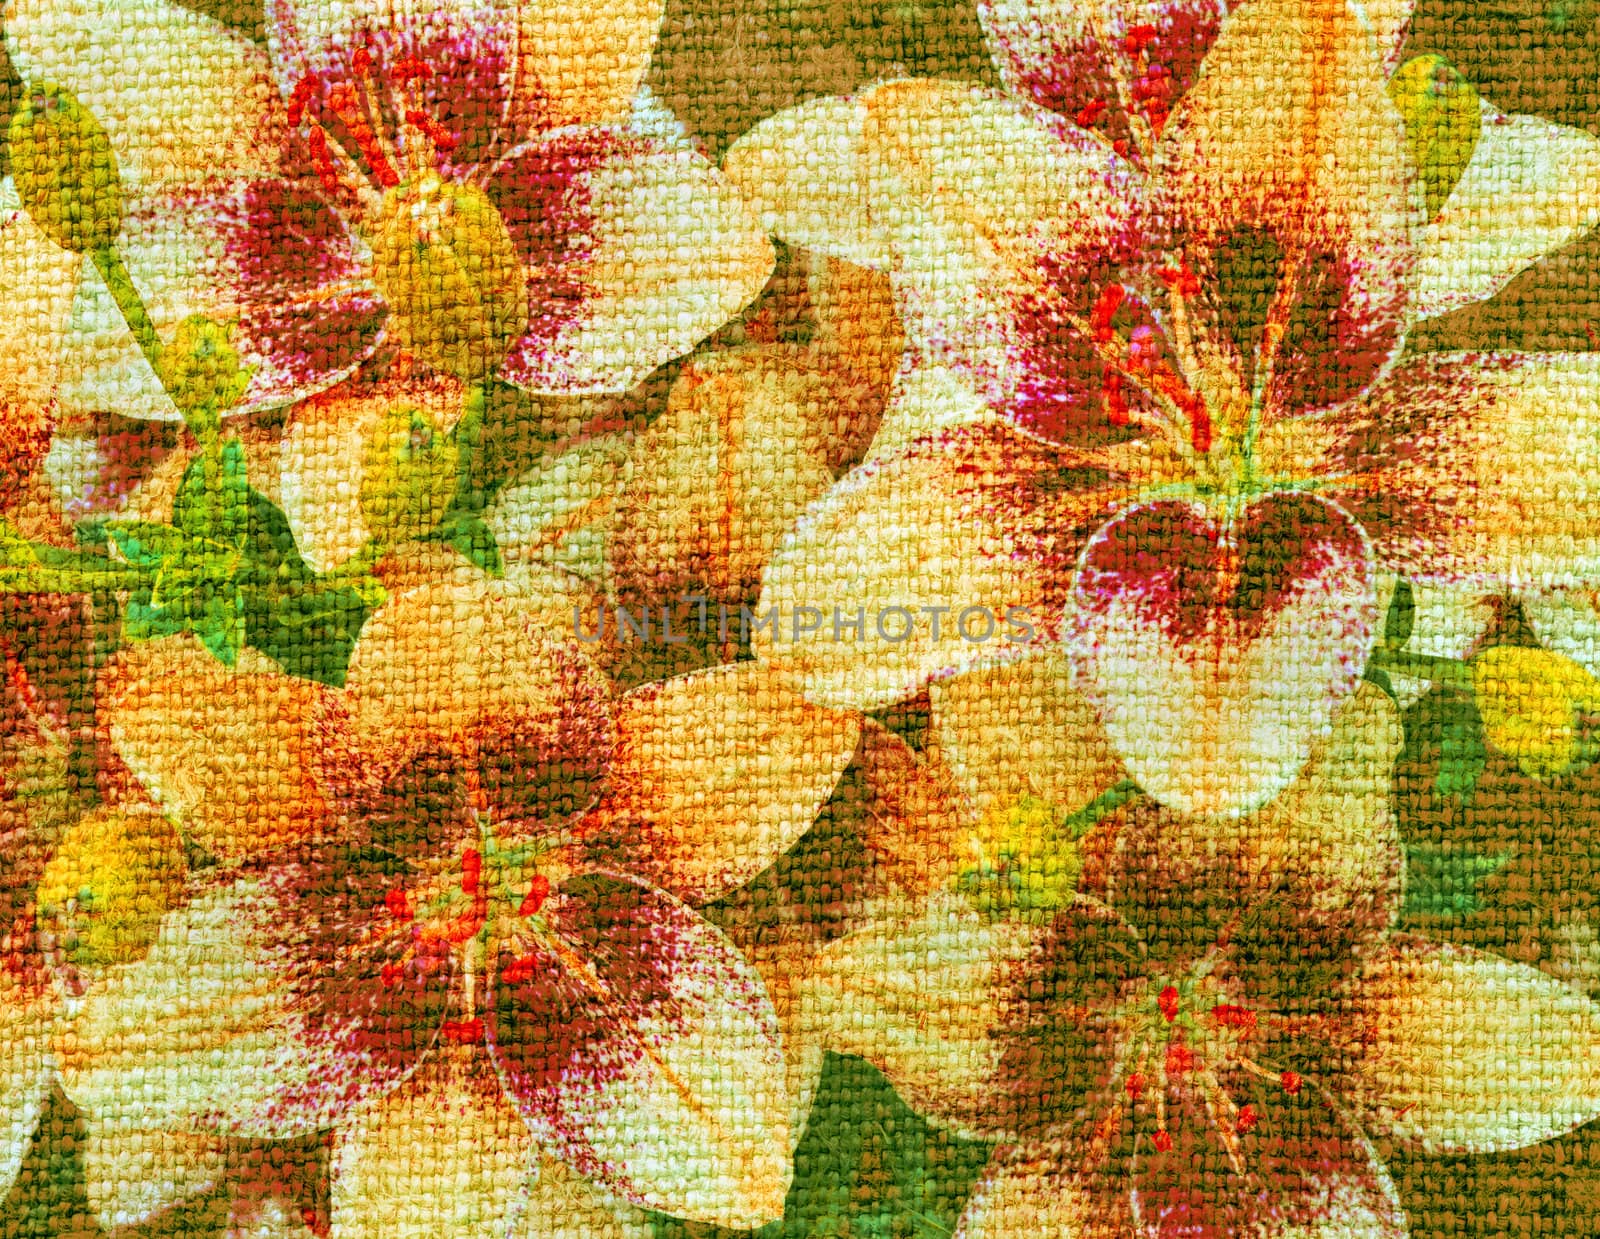 Lily flowers on a canvas by alexcoolok